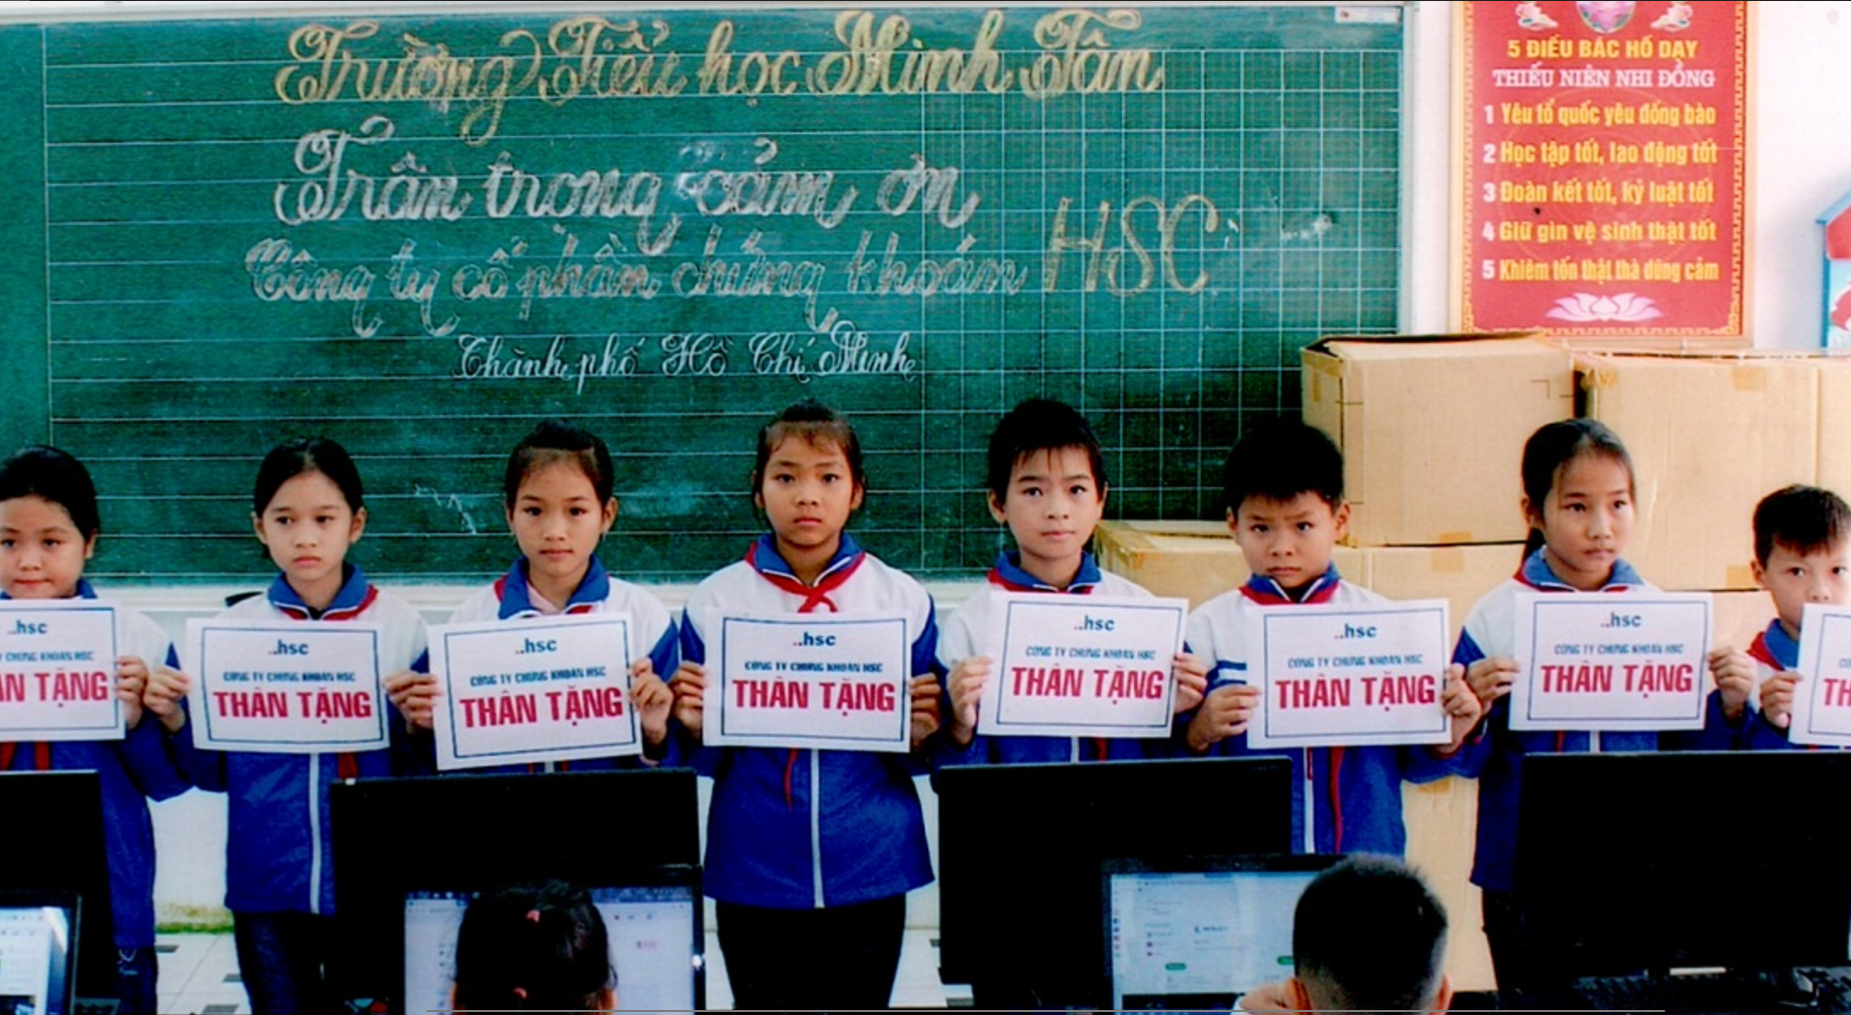 HSC gifting computers to a Minh Tan primary school